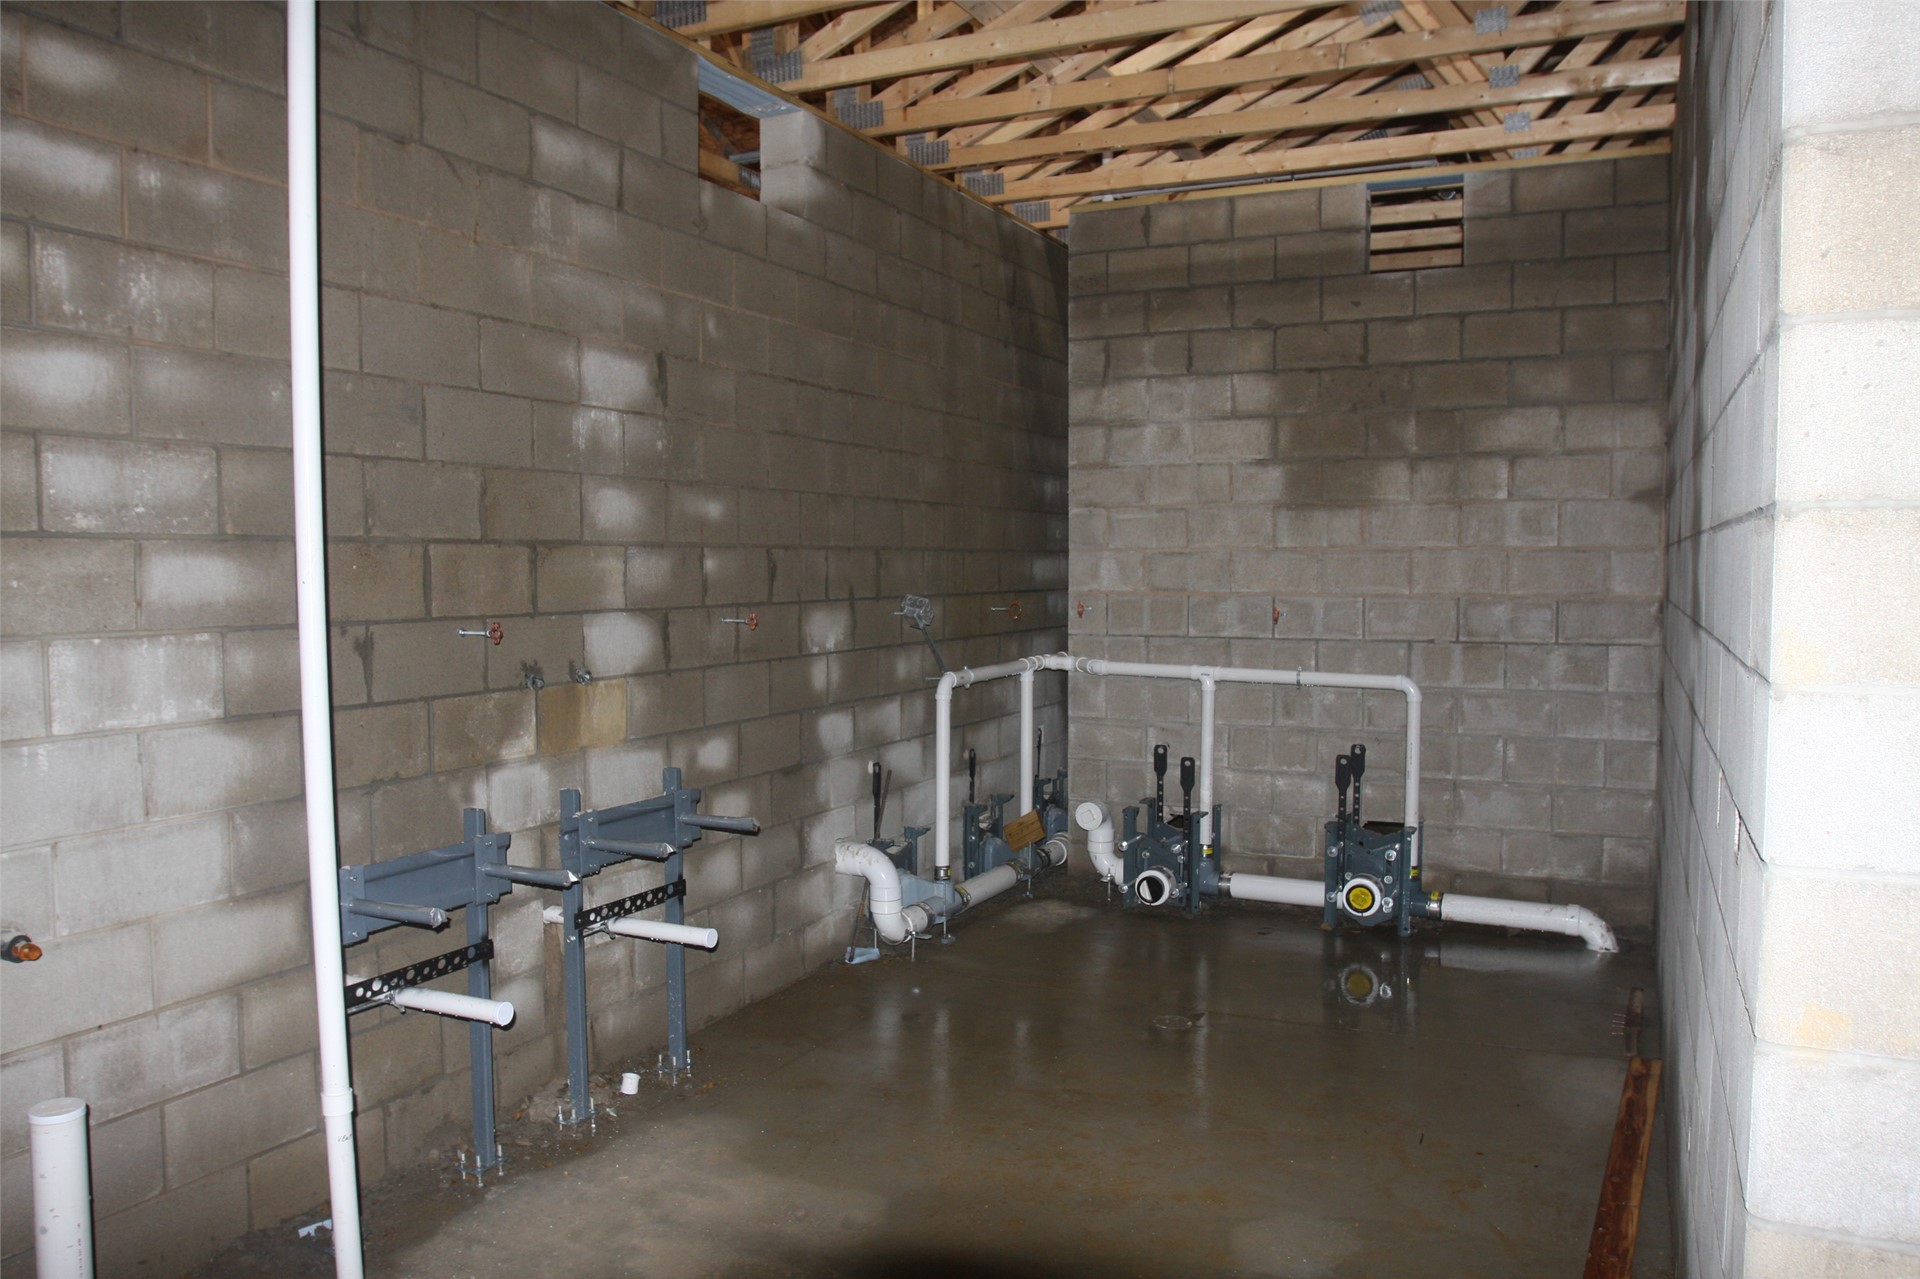 Plumbing for showers and restrooms inside locker rooms on visitor side of stadium building